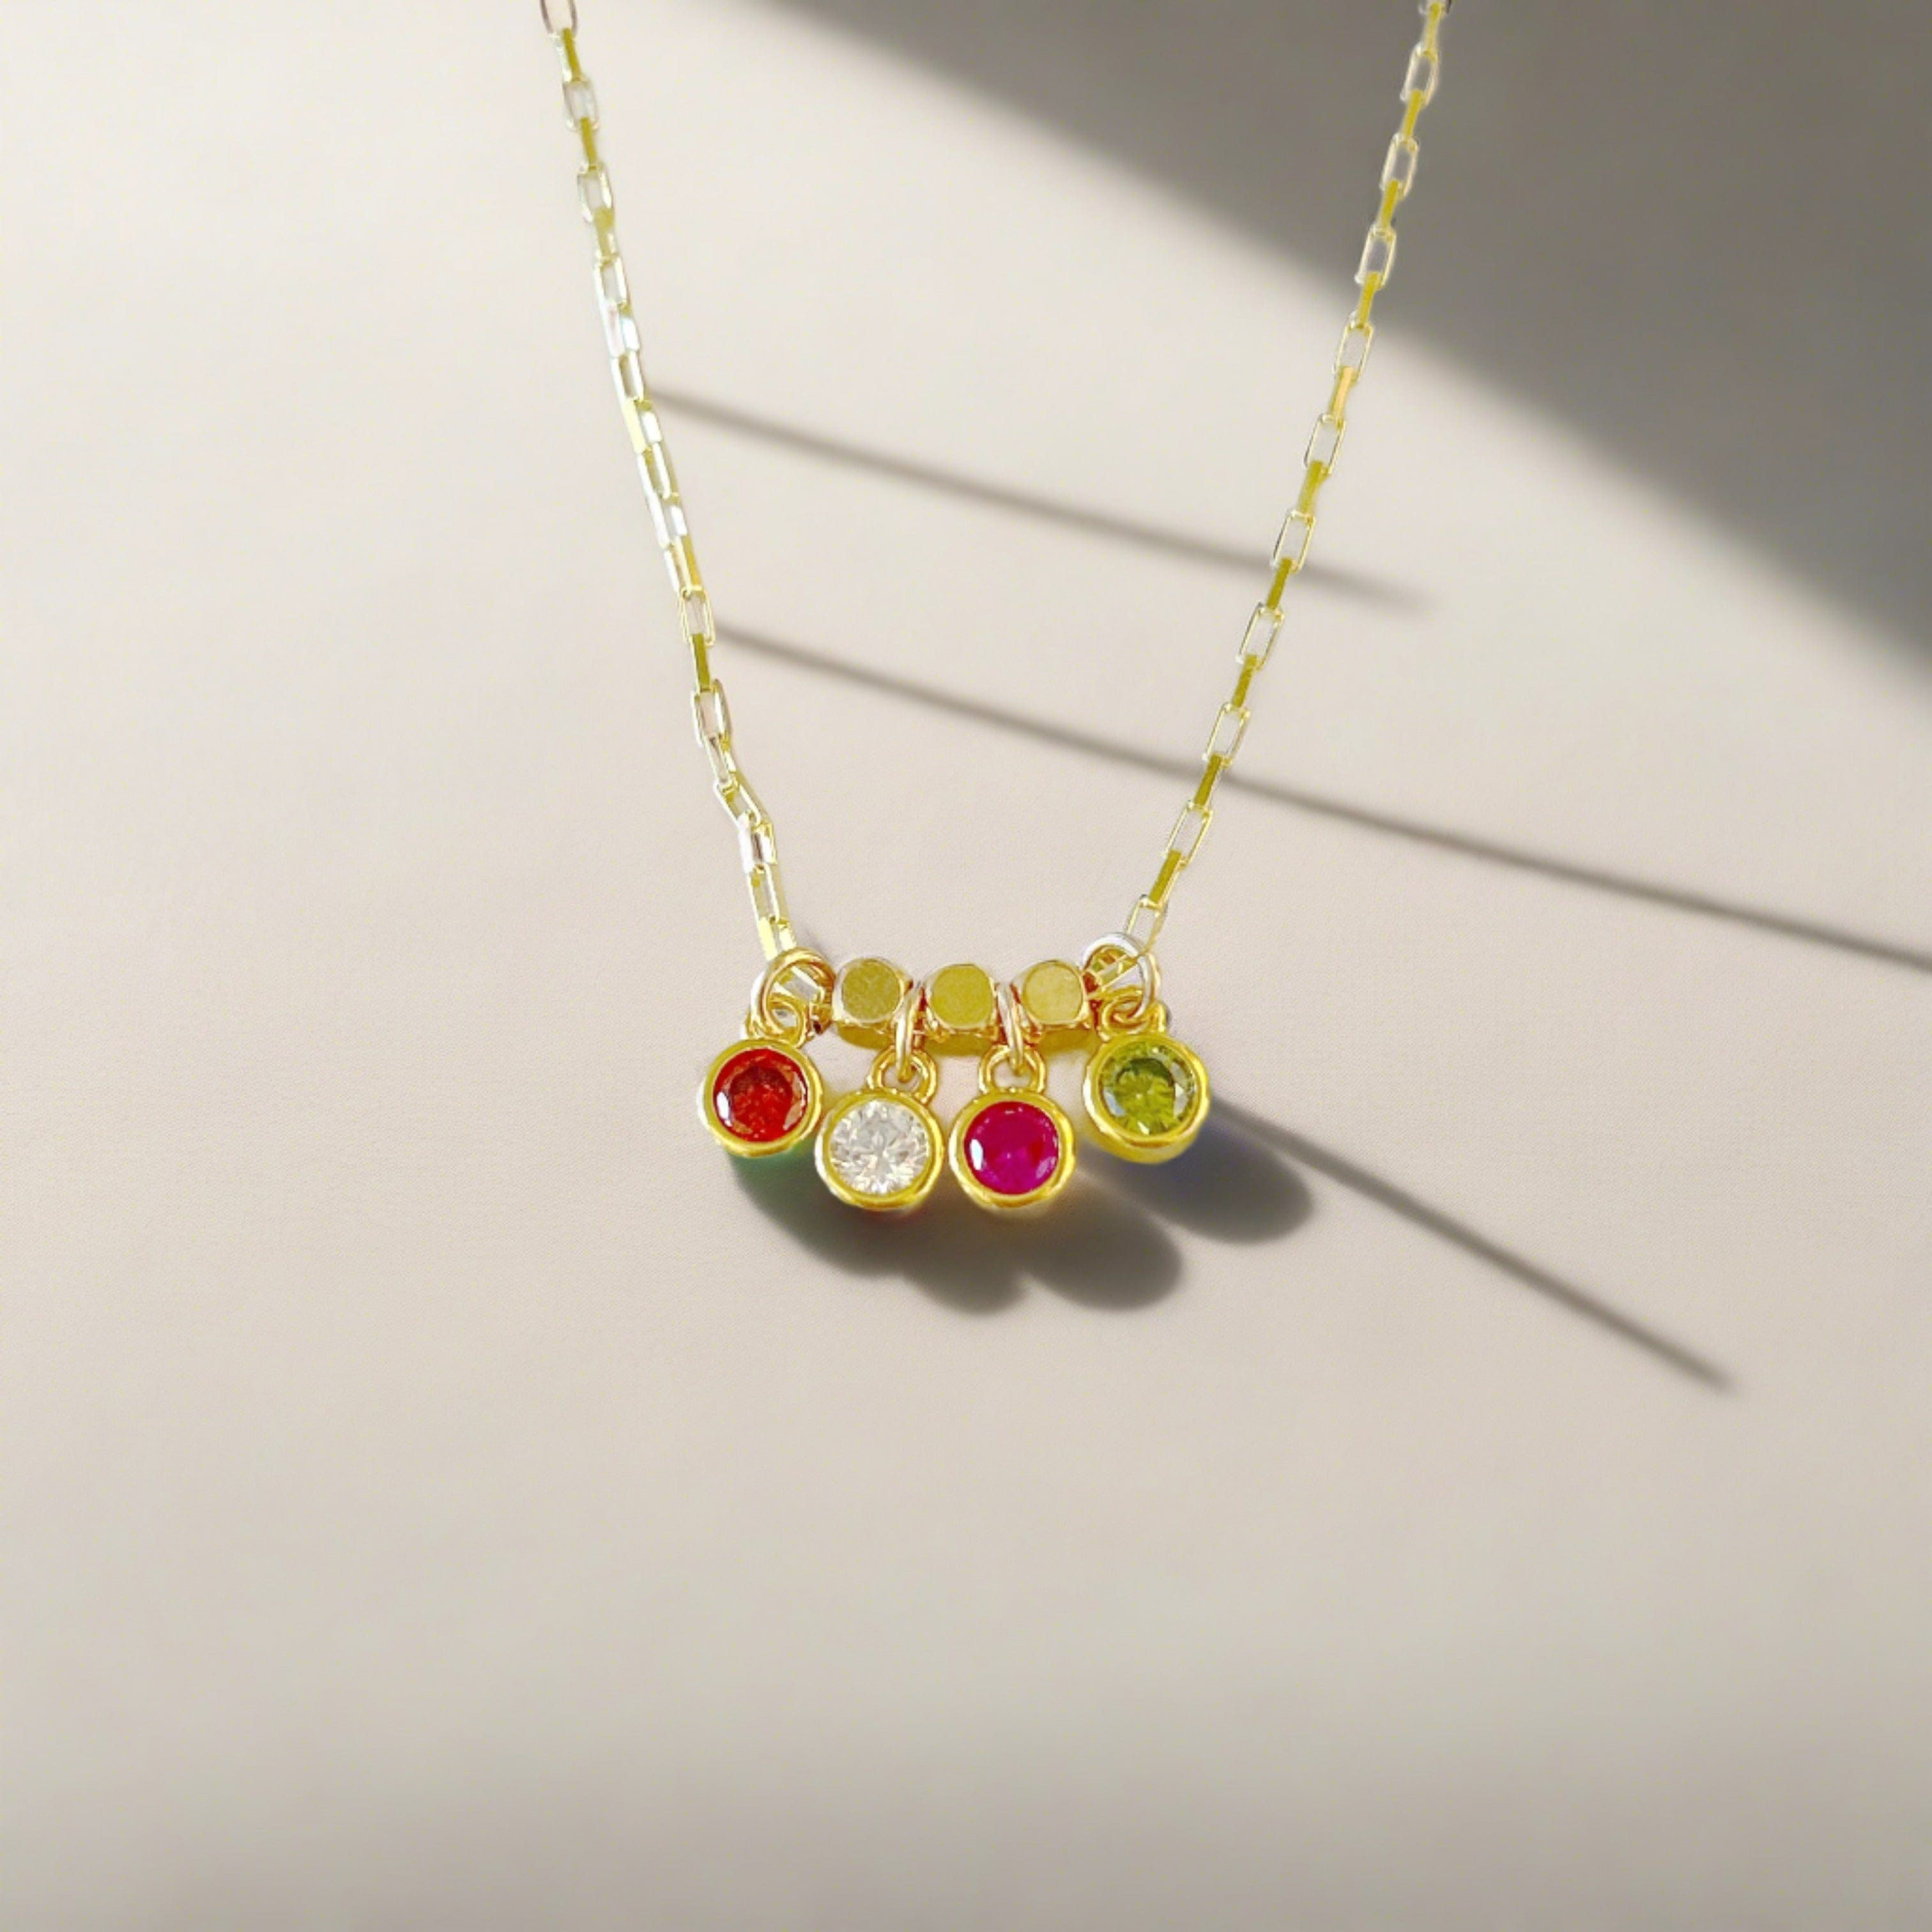 Gold paperclip style necklace featuring 4 different birthstones separated by cube shape beads , a gift for a mom for mothers day or her birthday. Features a garnet , diamond, ruby, and peridot